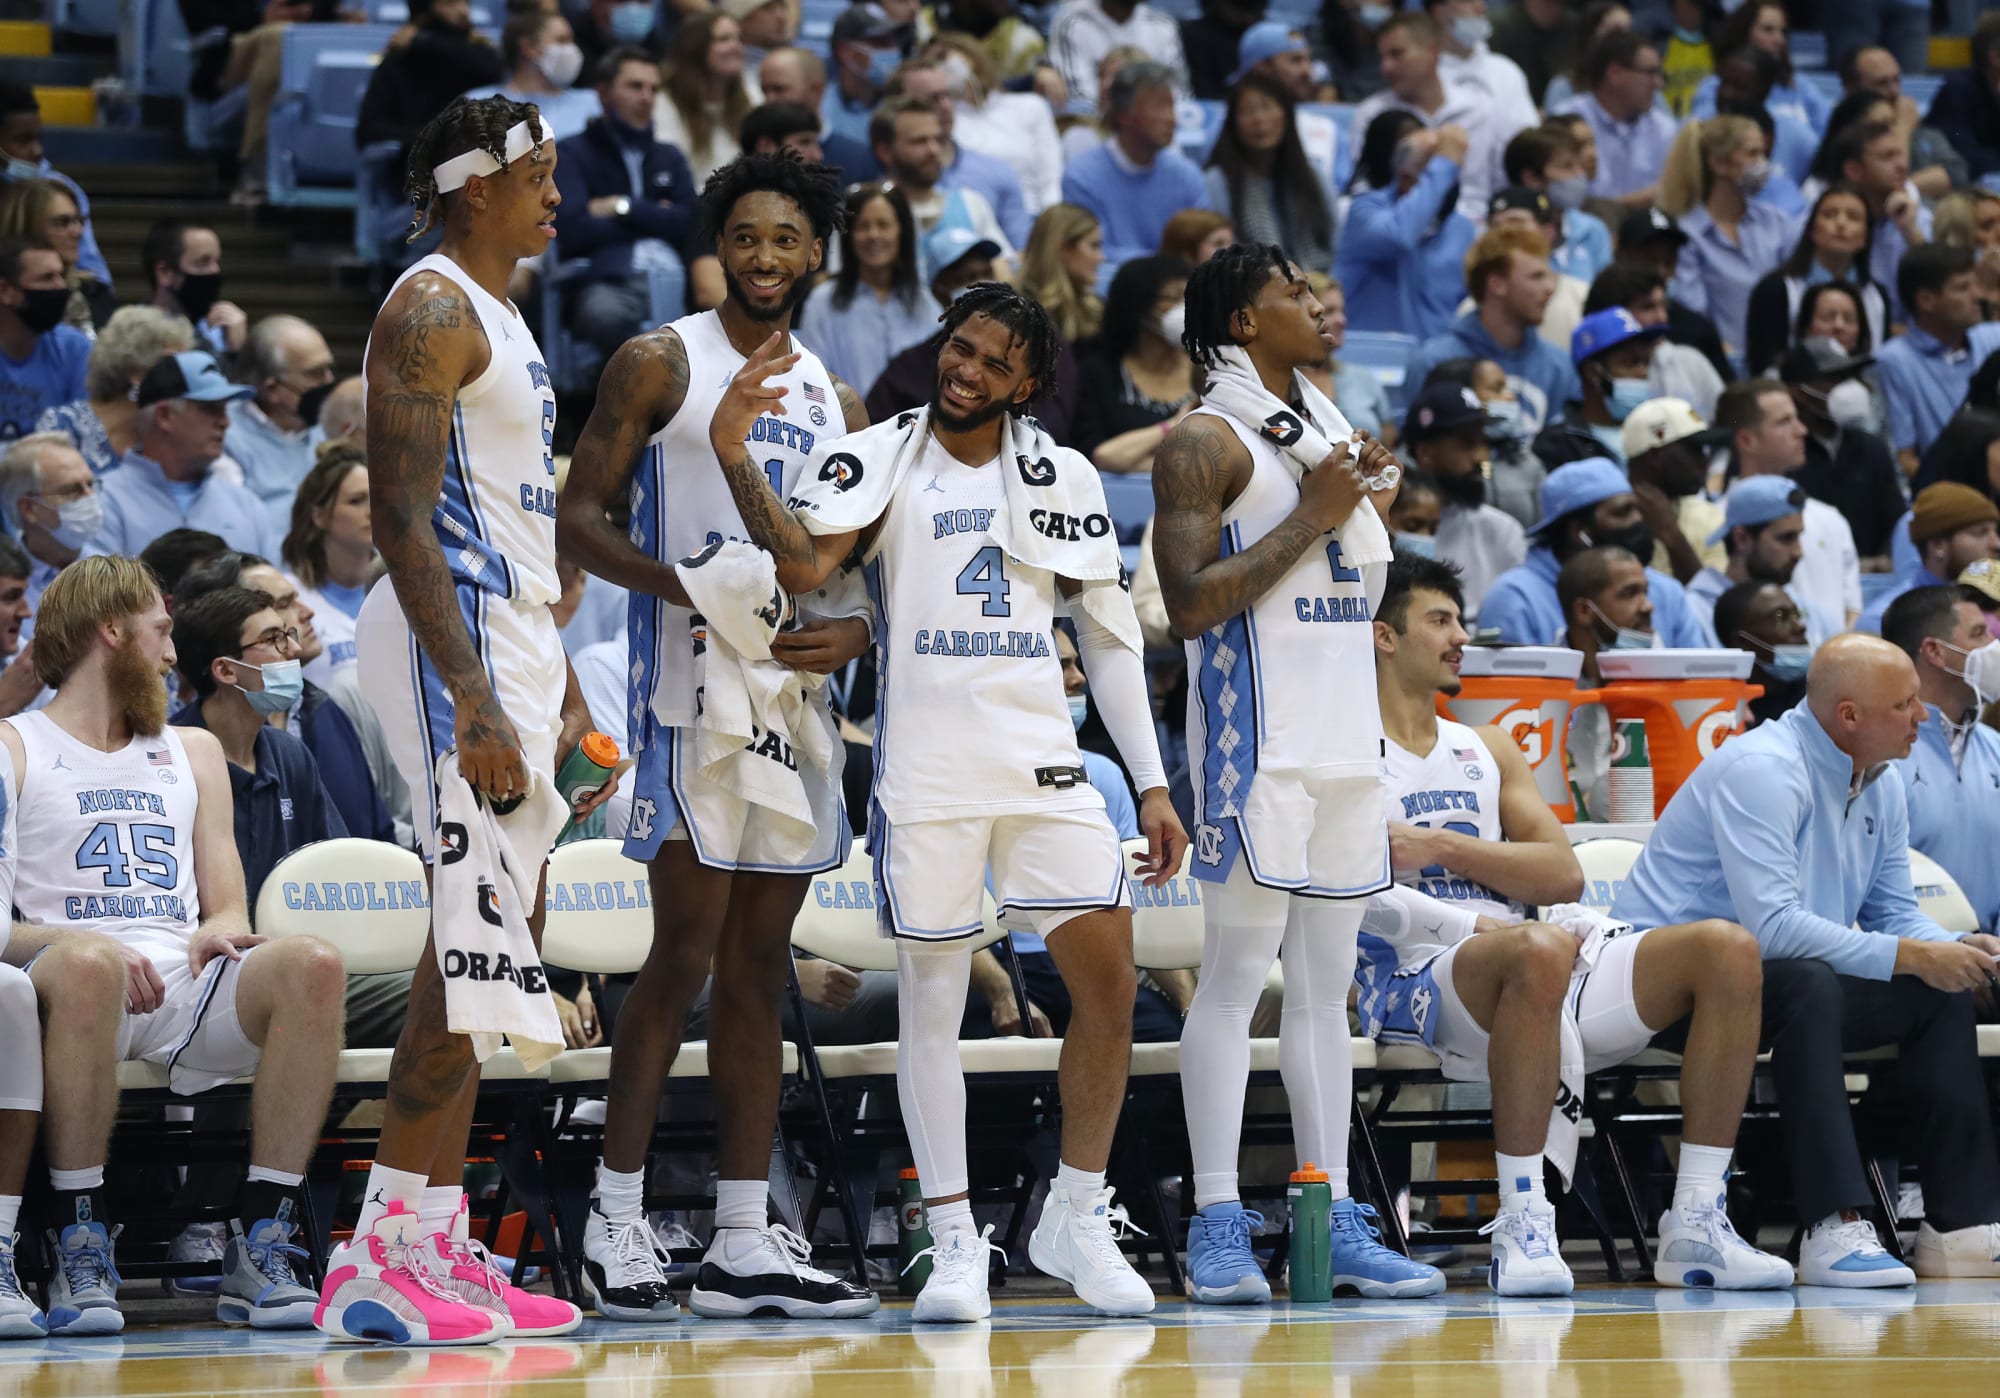 UNC Basketball vs Tech Yellow Jackets Game Preview